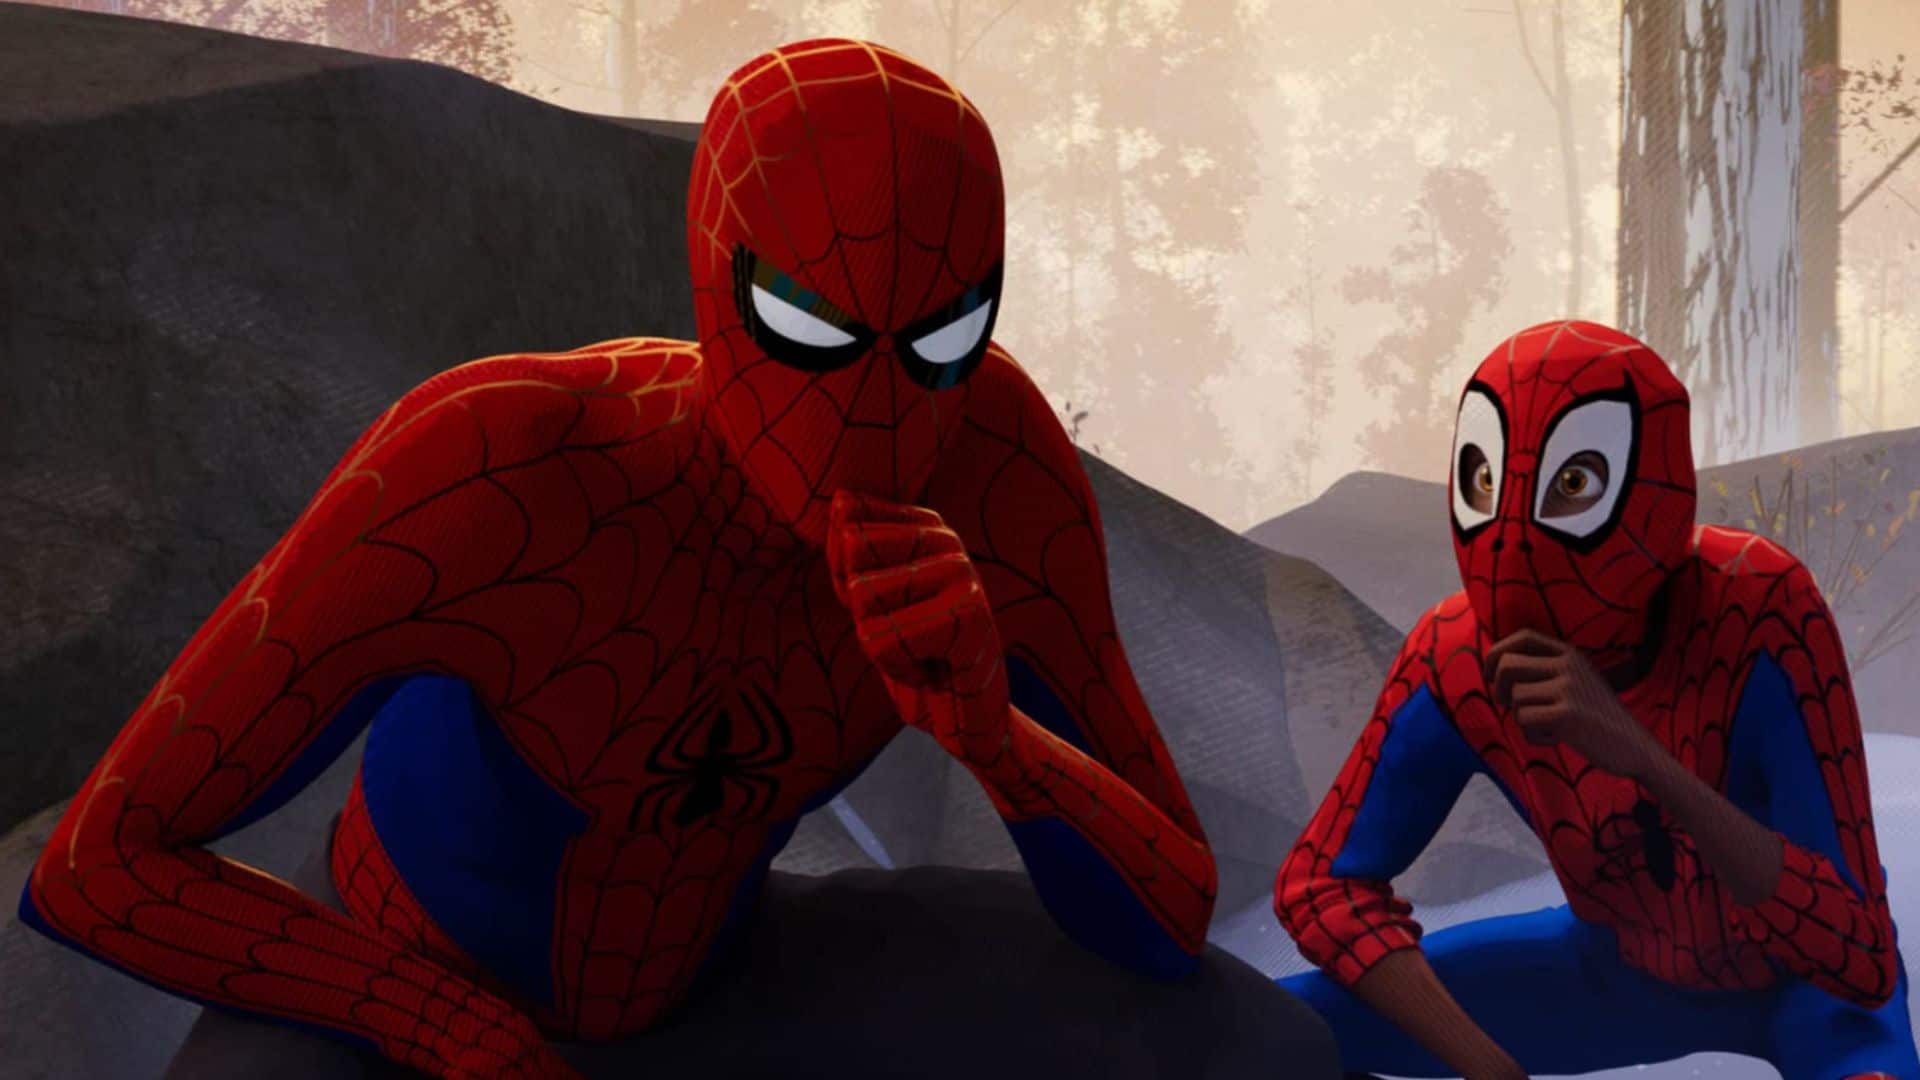 Peter Parker and Miles Morales in Spider-Man costumes in this image from Sony Pictures Animation